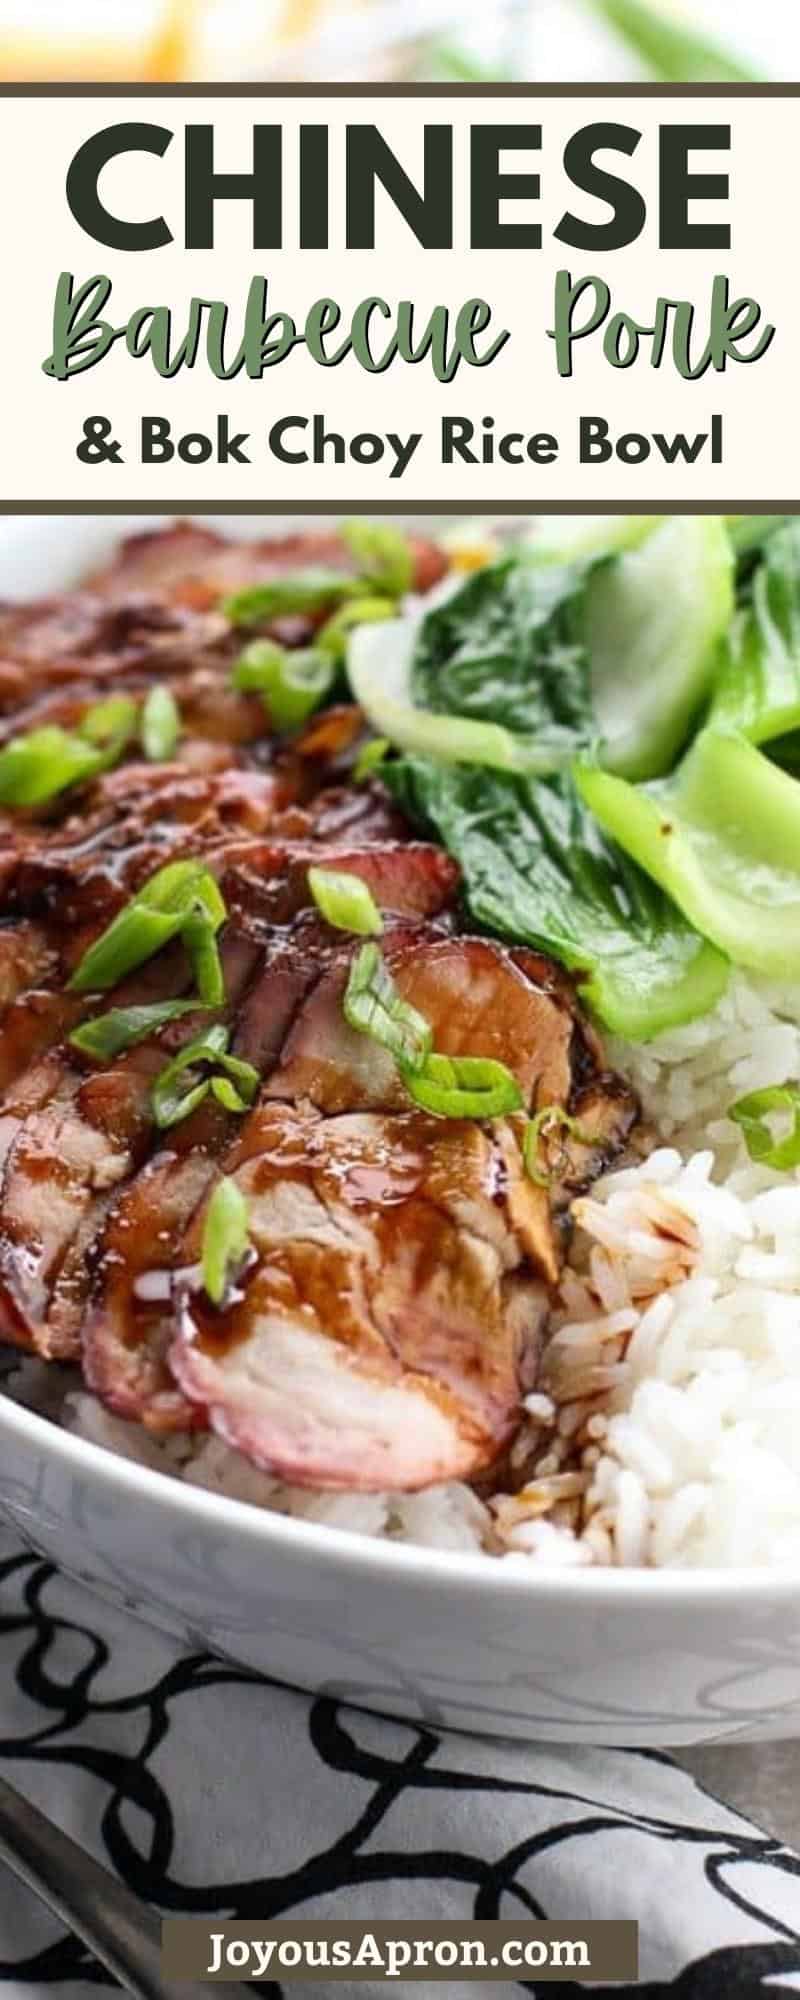 Chinese BBQ Pork (Char Siu) and Bok Choy Rice Bowl - A classic and authentic Chinese dish! Fragrant steamed jasmine rice topped with sweet and salty glazed fire-roasted slices of Chinese Barbecue Pork and Baby Bok Choy. Drizzle with a sweet soy sauce. A flavorful and delicious meal! via @joyousapron